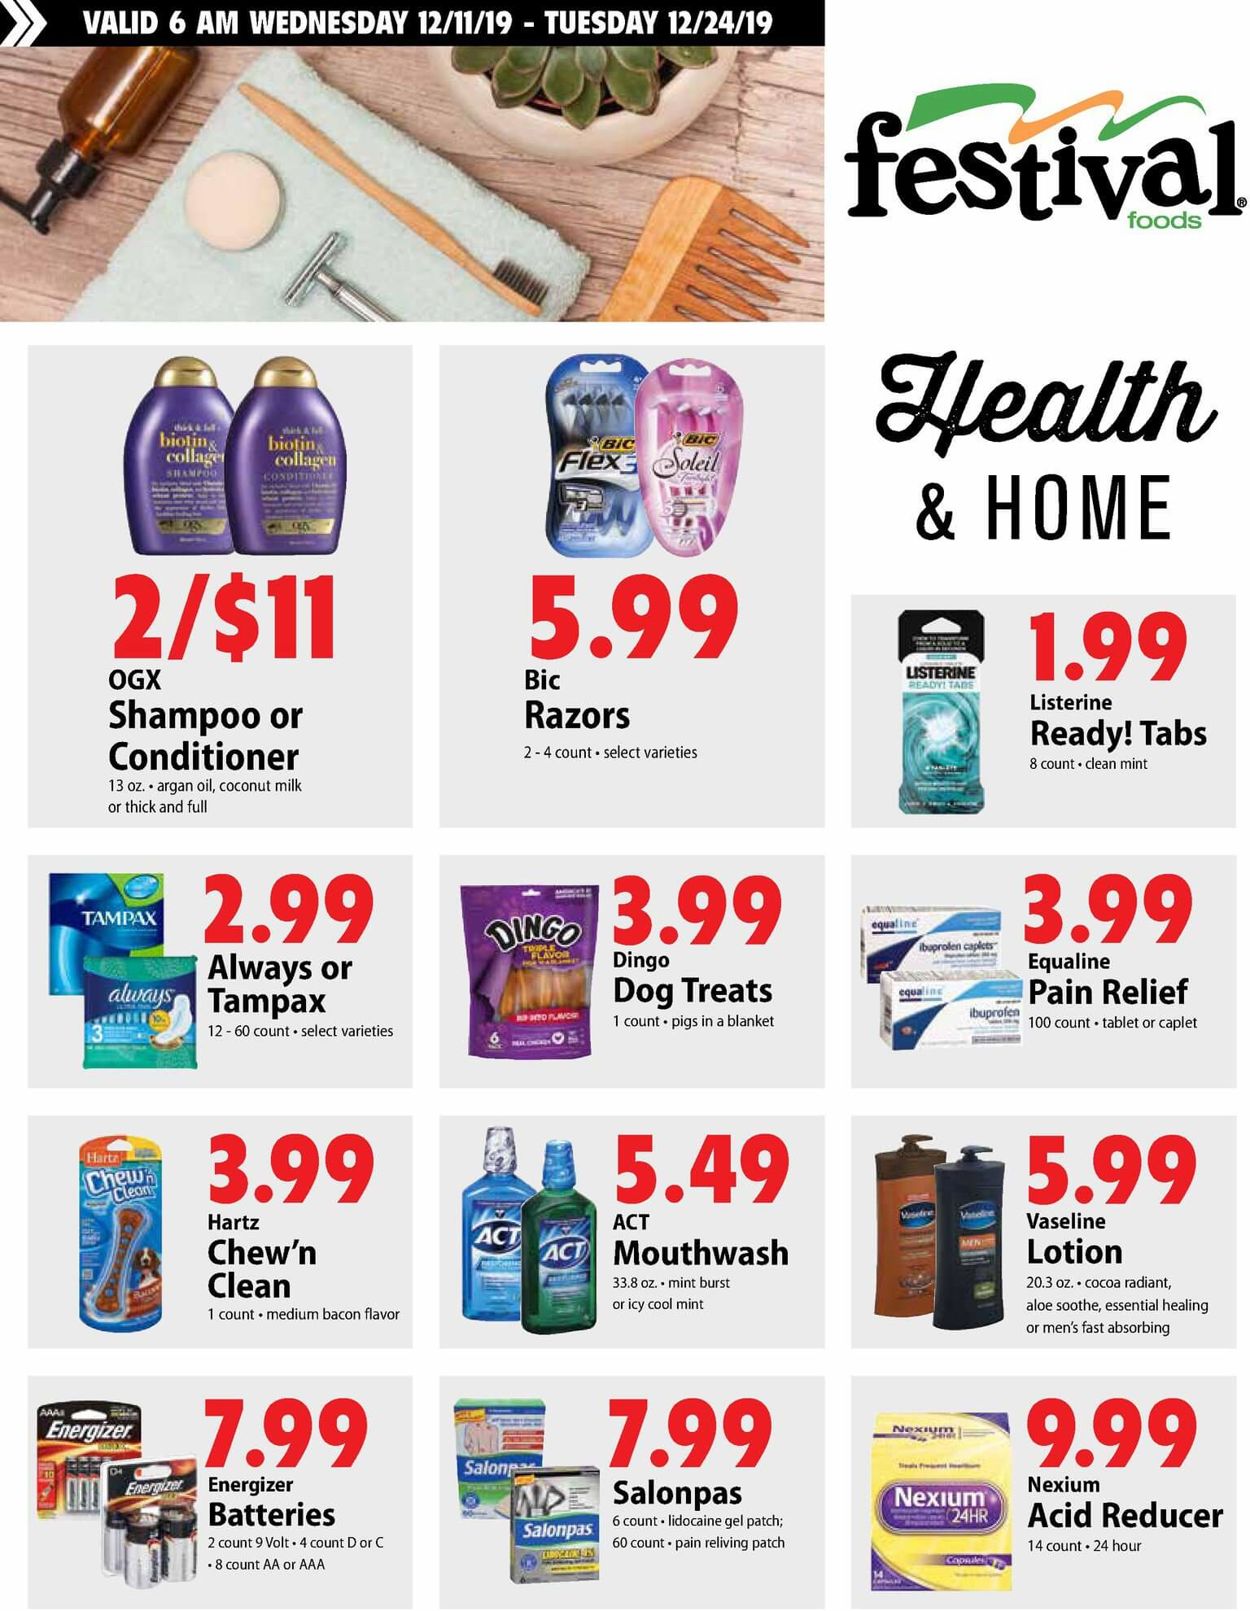 Festival Foods - Christmas Ad 2019 Weekly Ad Circular - valid 12/11-12/17/2019 (Page 10)